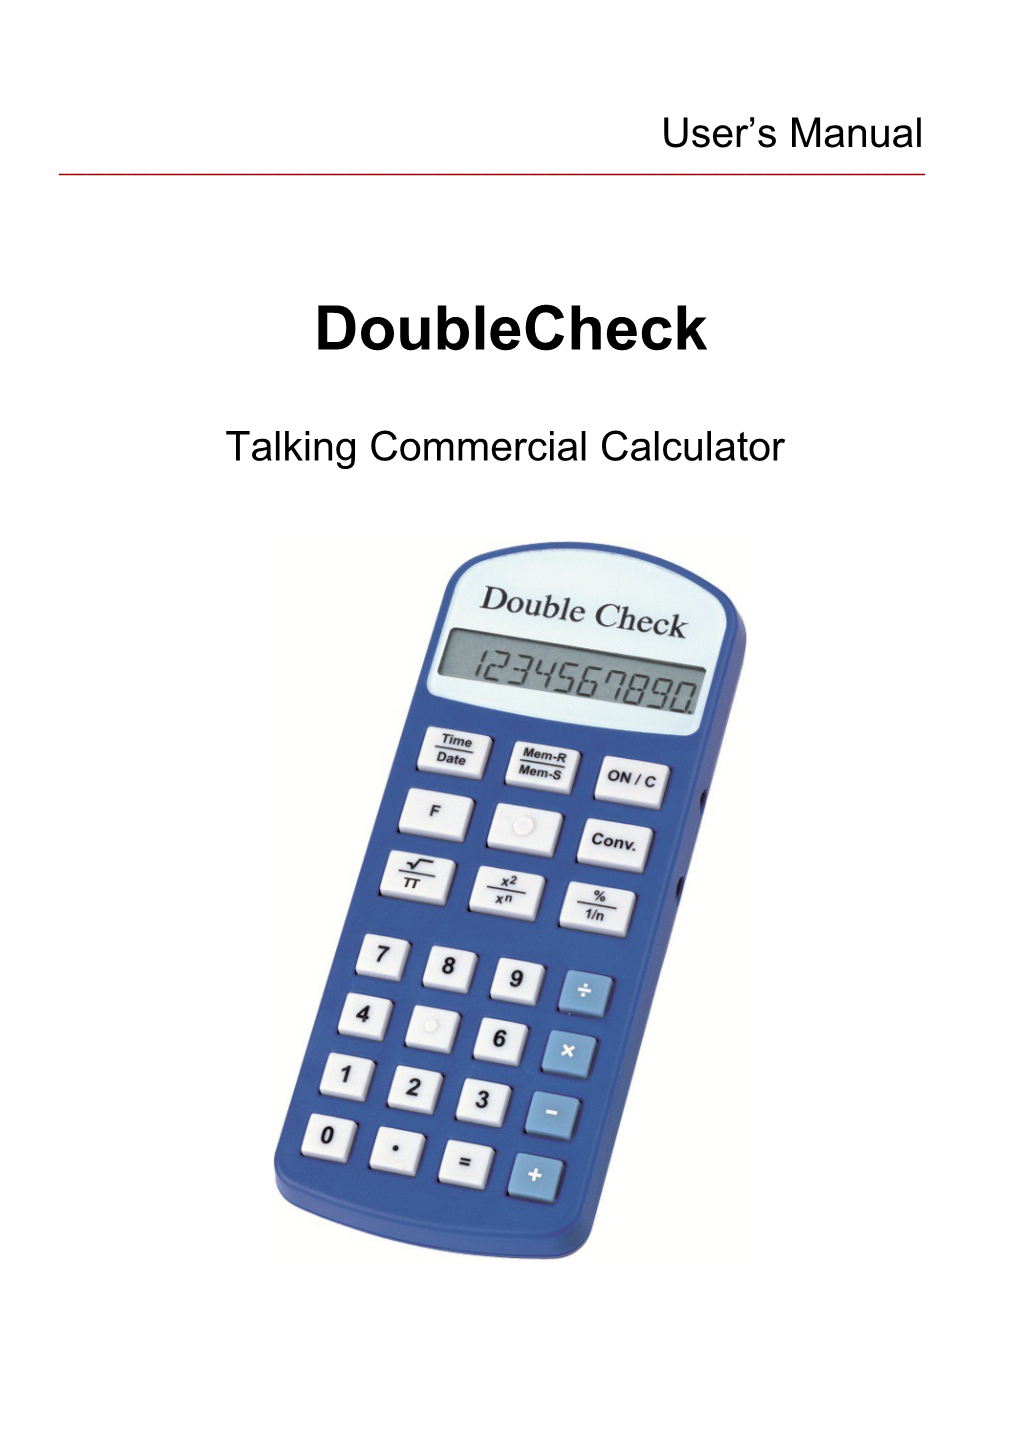 Talking Commercial Calculator